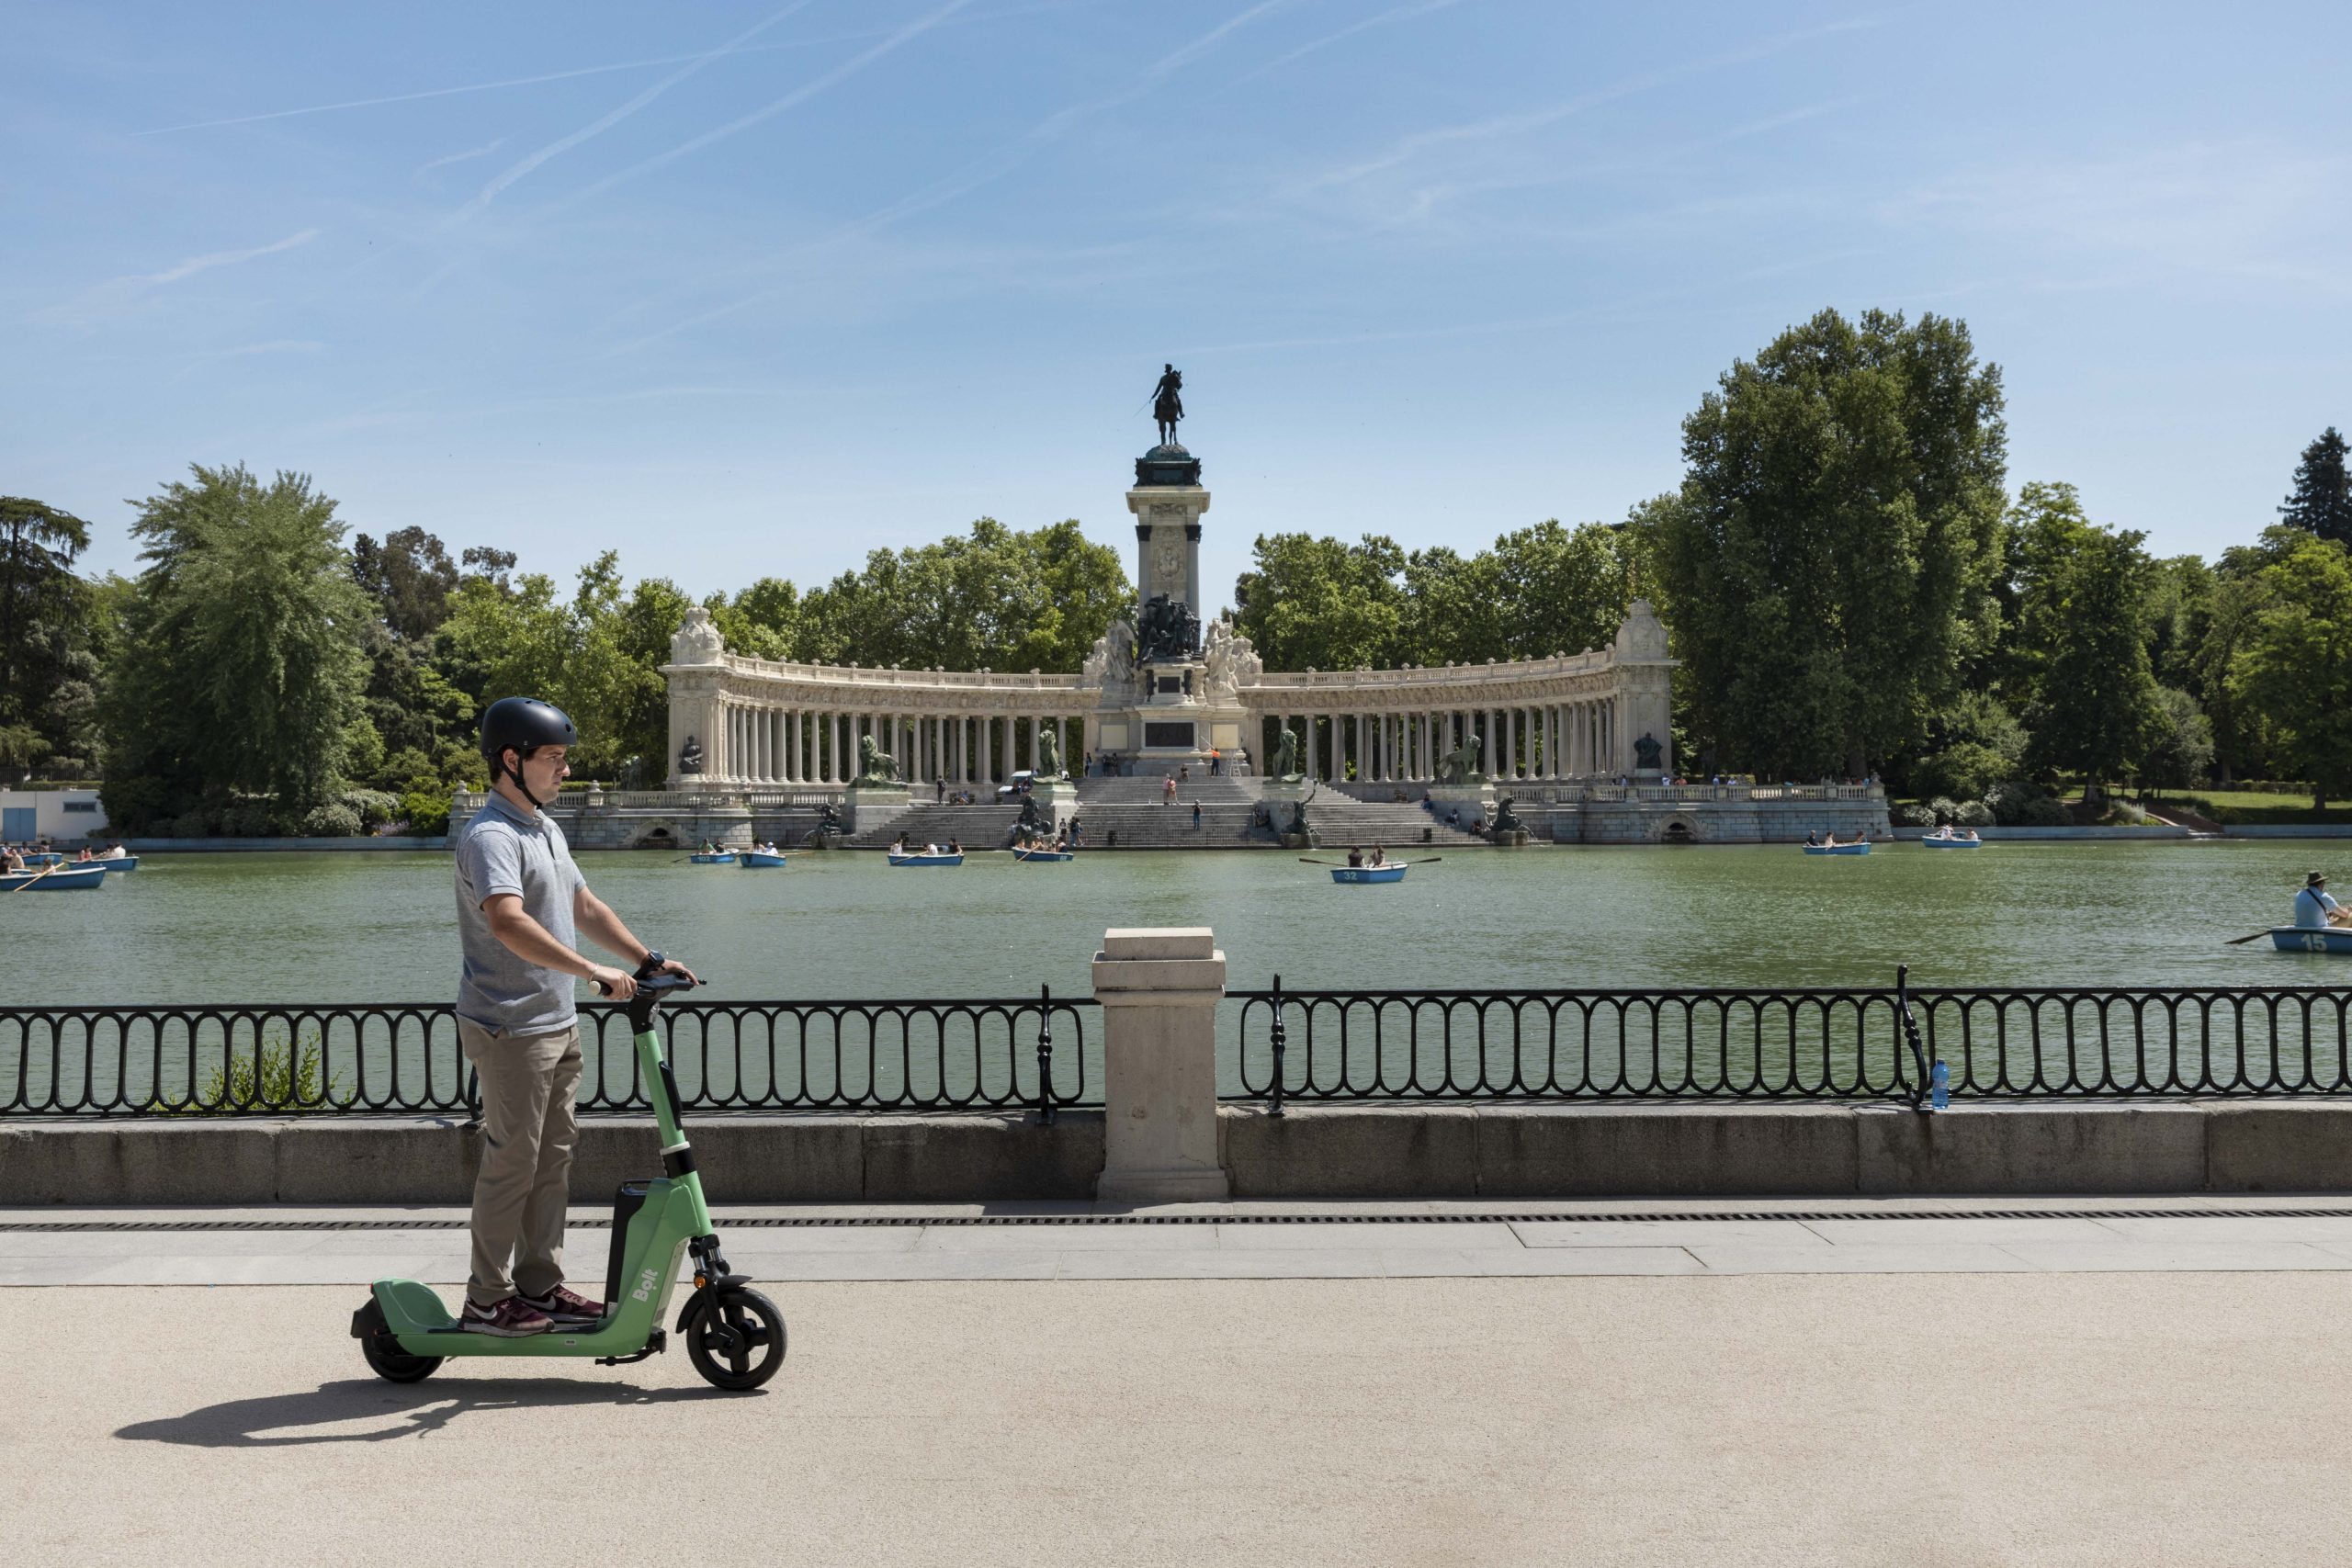 Bolt deploys Drover AI tech to prevent e-scooter collisions on pavements